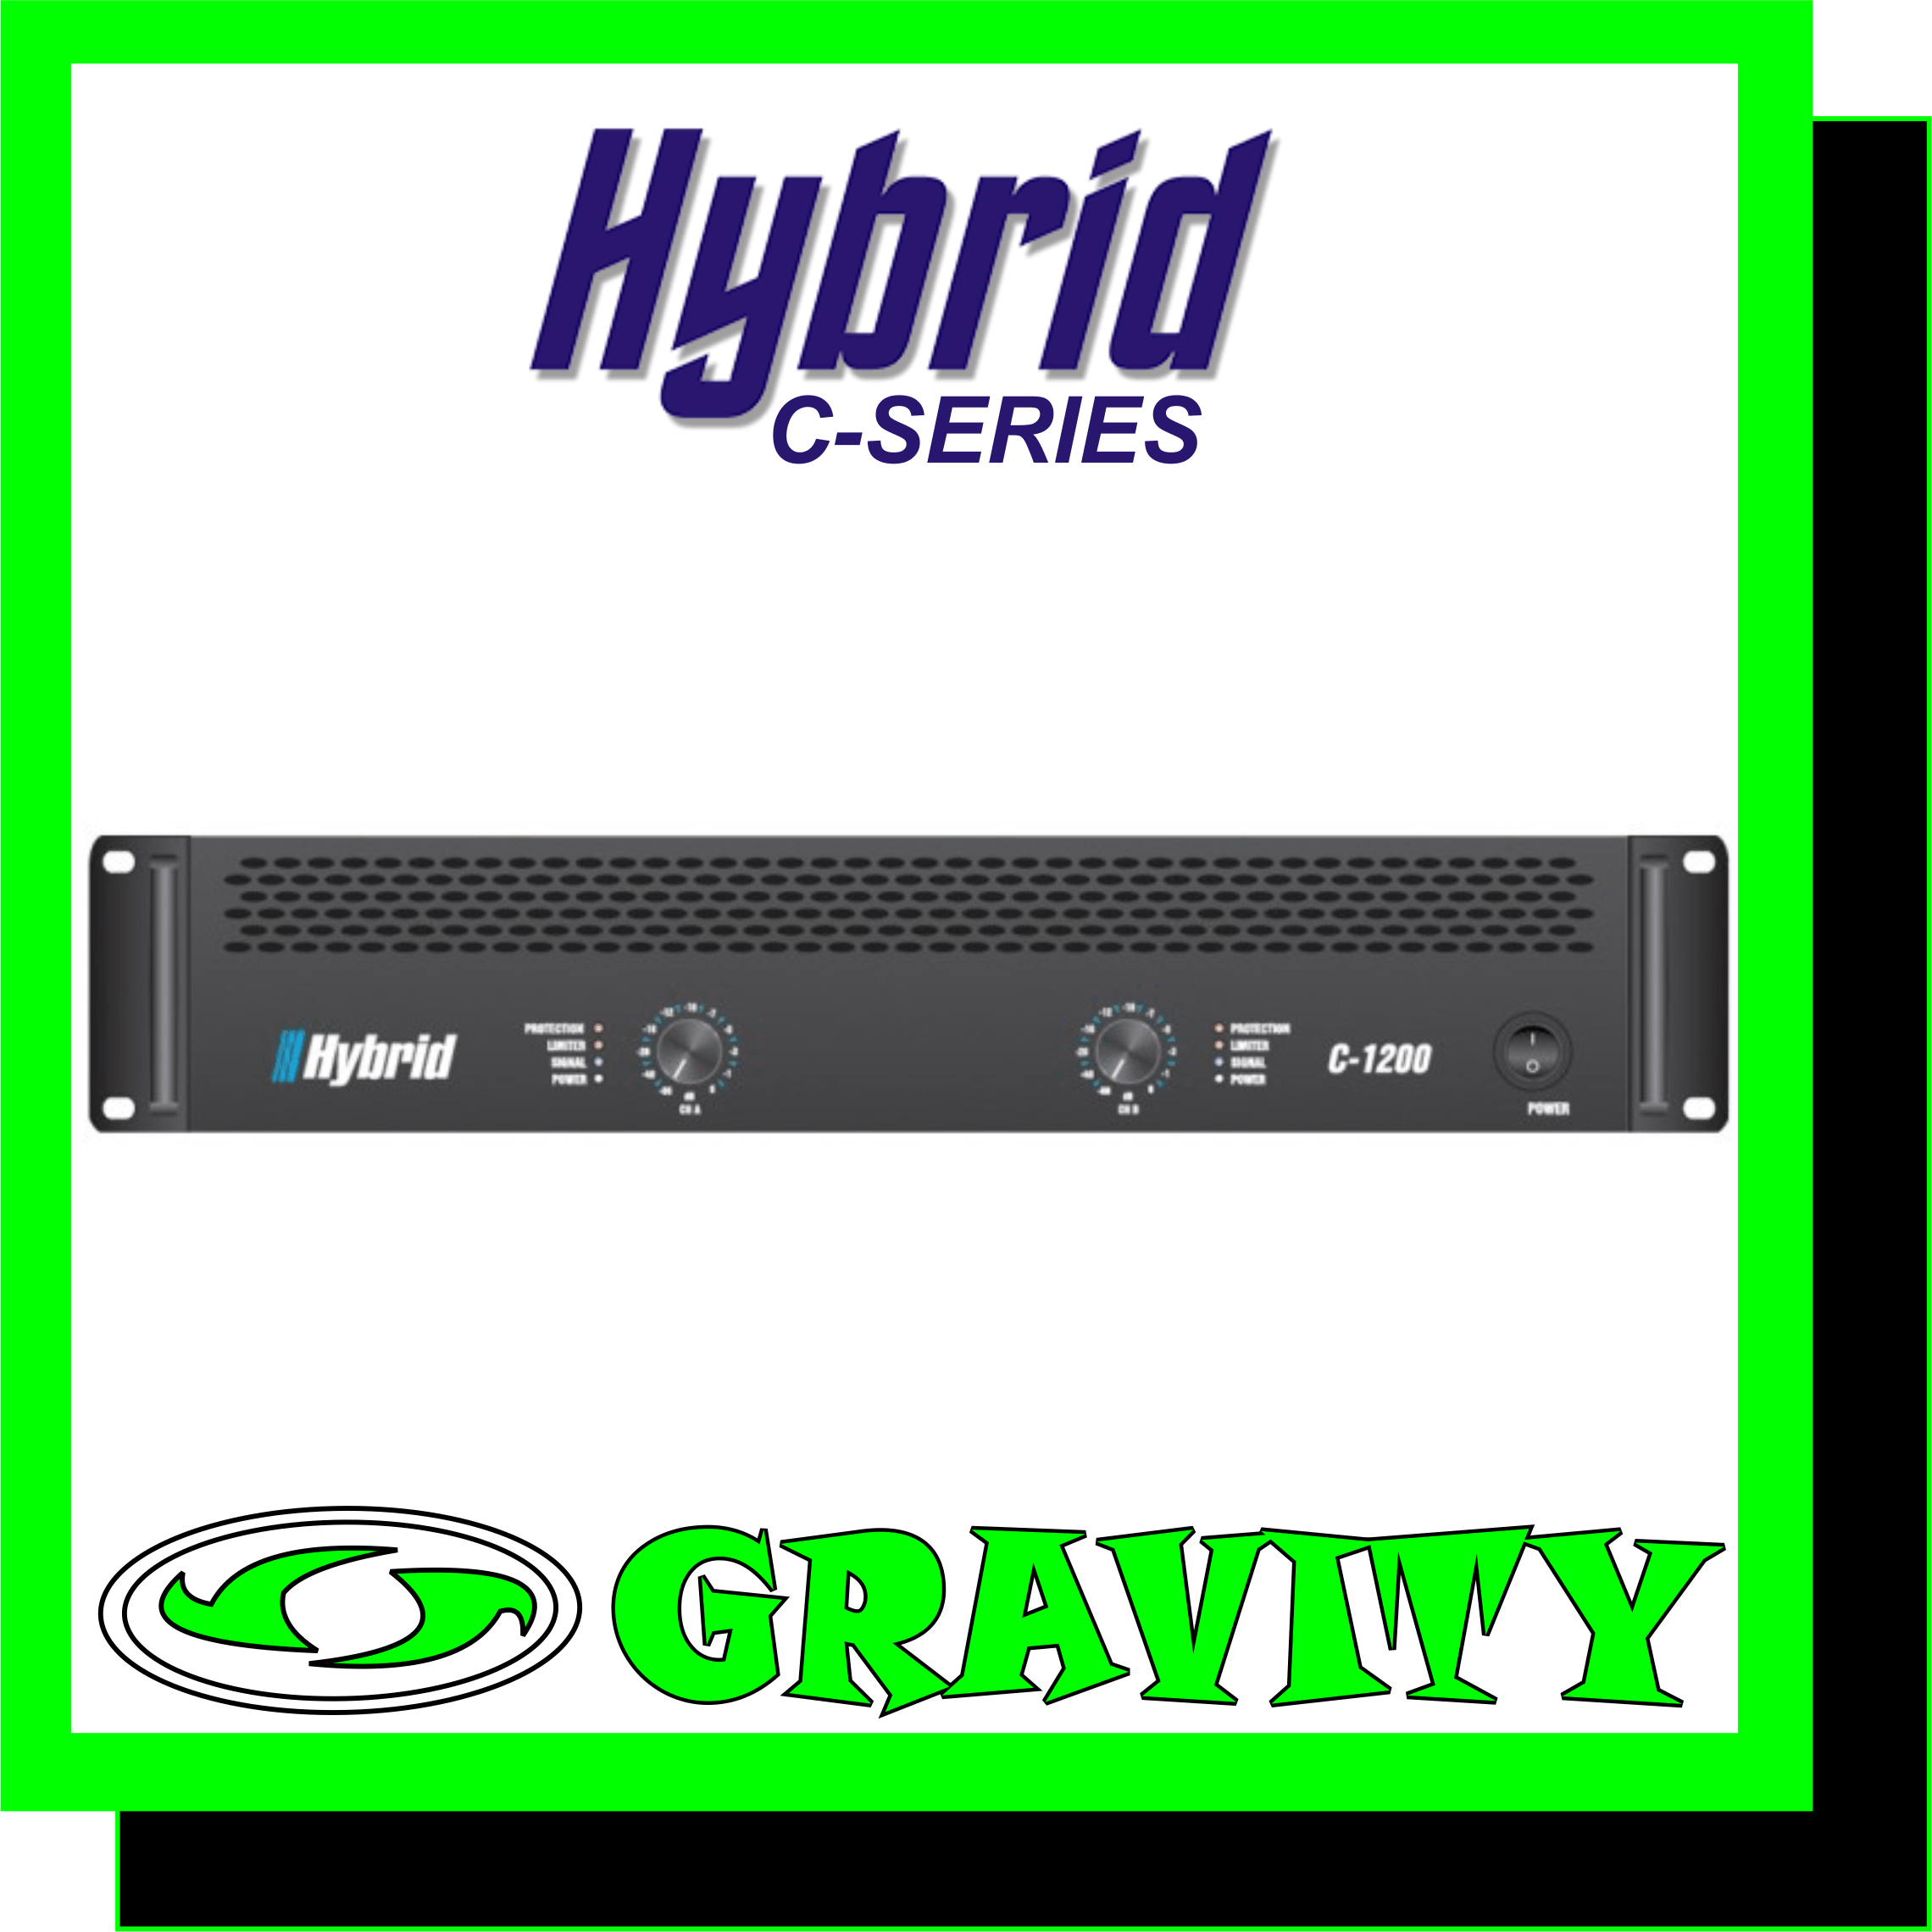 Hybrid C1200MK2 2X600W with X-over  8Ohm Stereo Power . RMS/CH 385W 4Ohm Stereo Power . RMS/CH 600W  8Ohm Bridged Mono Power . RMS 1140W  Frequency Response ( 1W/8O) 20Hz 20KHz +/- 3dB Protection DC Protection . Short Circuit Protection . Thermal Protection . Inrush Current Protection . Soft Start Portection . Input & Overload Protection THD+N (20Hz-20KHz) <0.1% Damping Factor (1KHz @ 8O) >300 Hum & Noise(A weighted . -80dBW) 95dB Input Impedance (Balanced / Unbalanced) 20K Ohm / 10K Ohm Crosstalk (20Hz-20KHz Rated Power 8O) >60dB Cooling 2 x Fans . Dual speed . Front to Rear Airflow  Input Connectors Jack/Female XLR Neutrik Combo + Male XLR Neutrik Output Connectors 3x Neutrik Speakon Dimensions (WxHxD) mm 483 x 88 x 430 Weight Kg 17.5